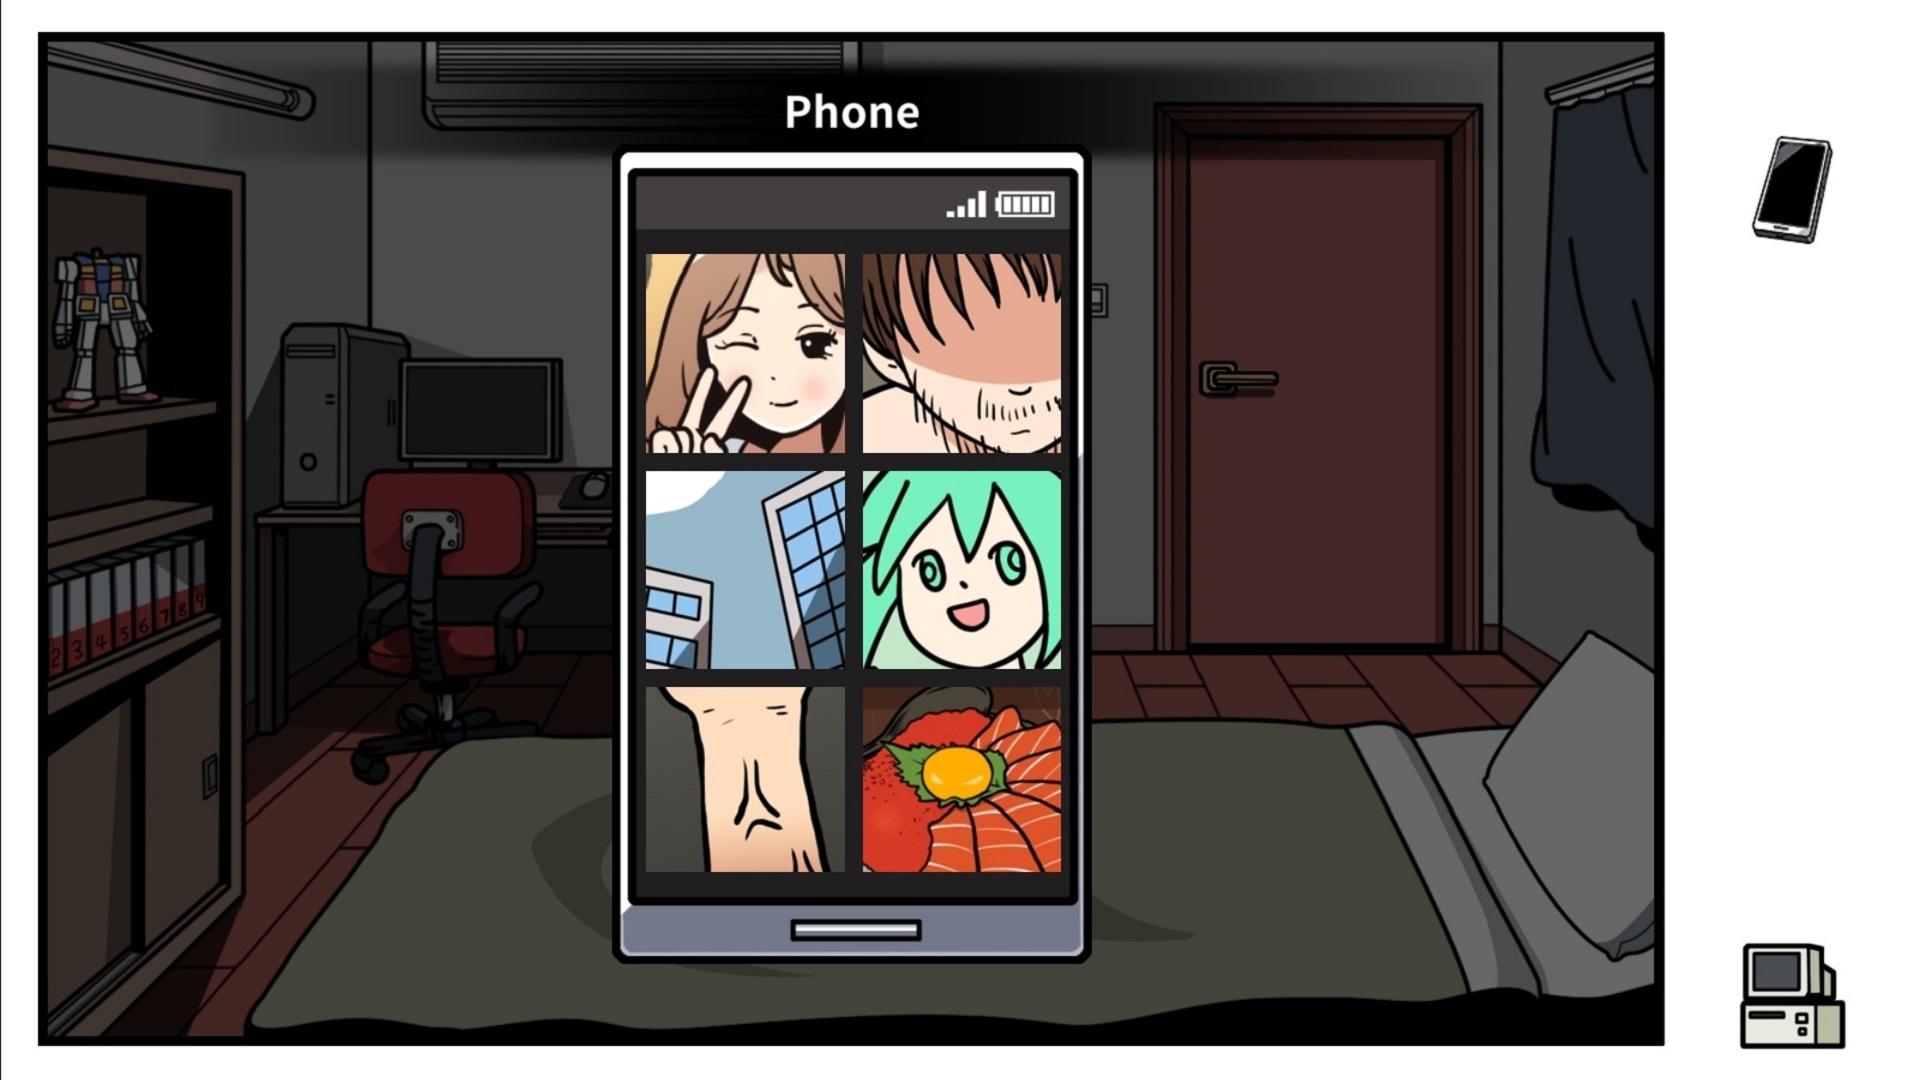 One Room vDemo MOD APK -  - Android & iOS MODs, Mobile Games  & Apps